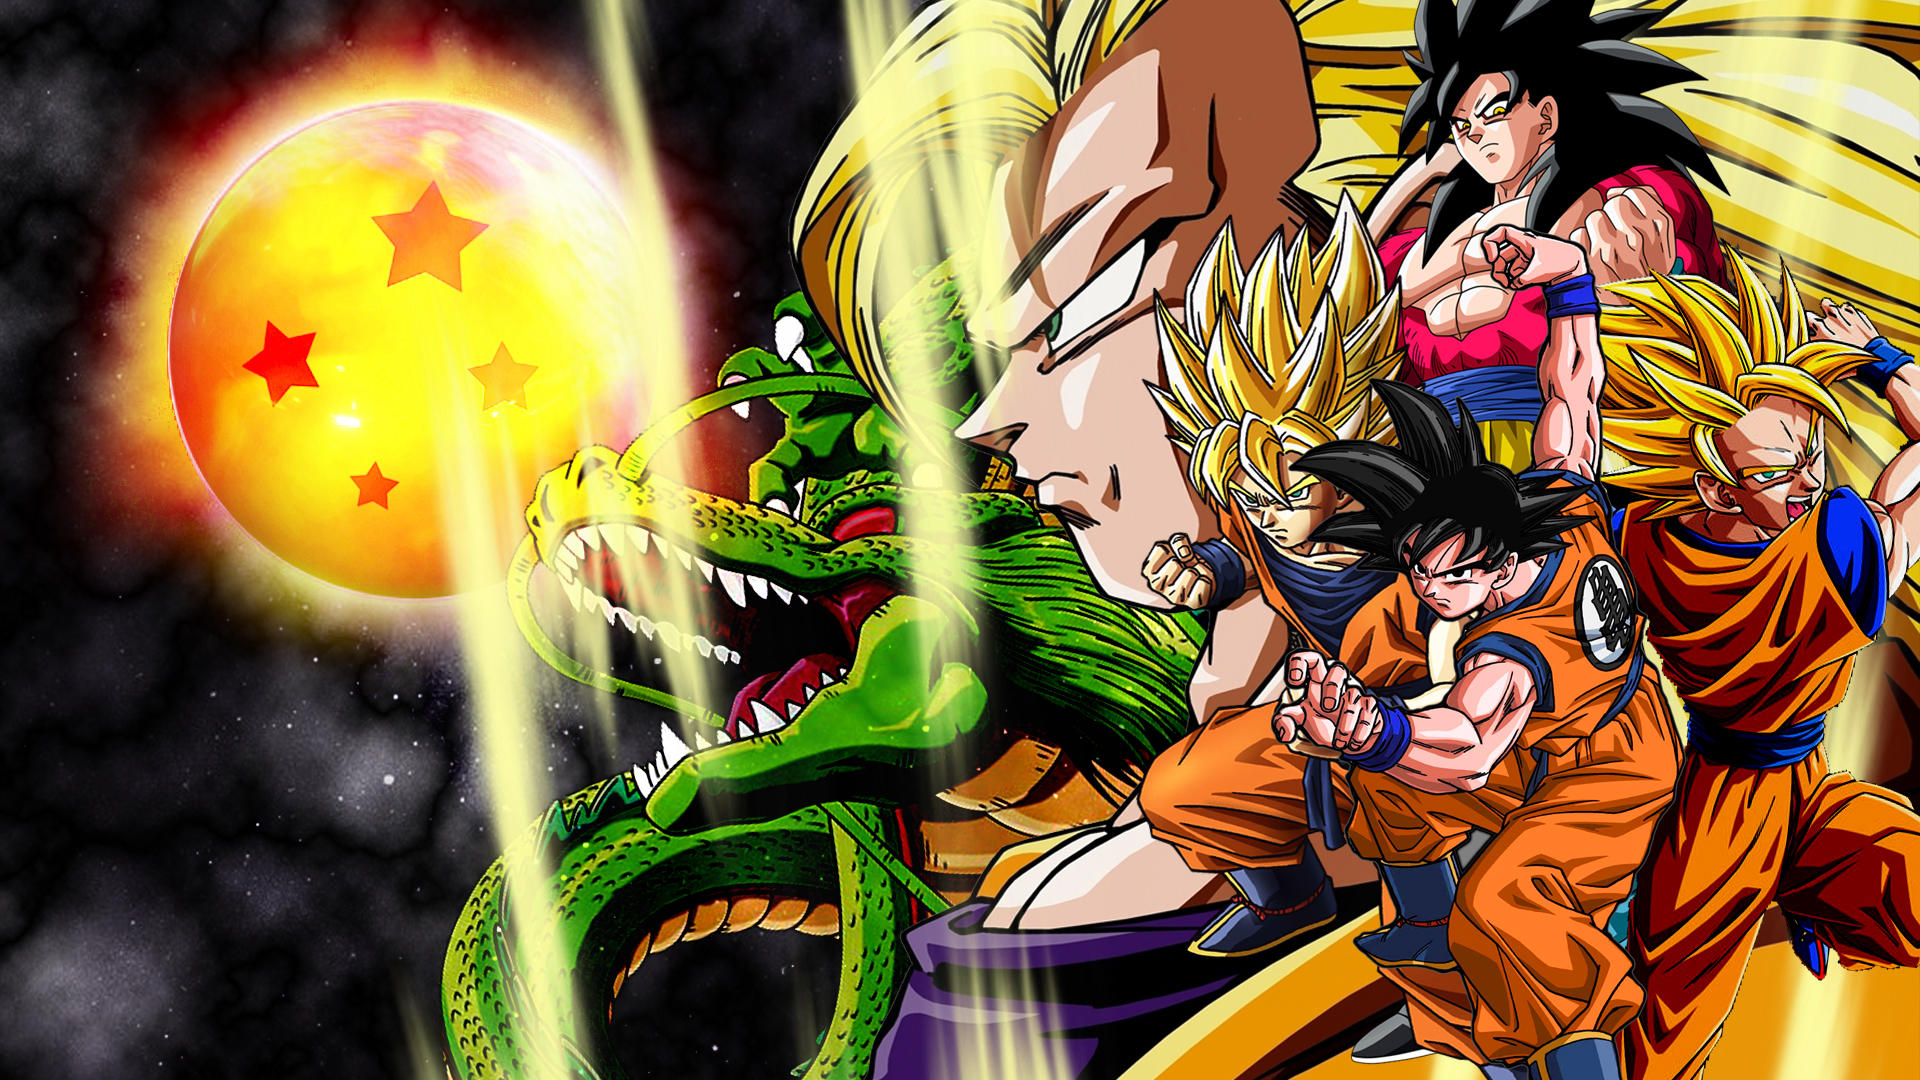 Related For Free Dragon Ball Z Wallpaper